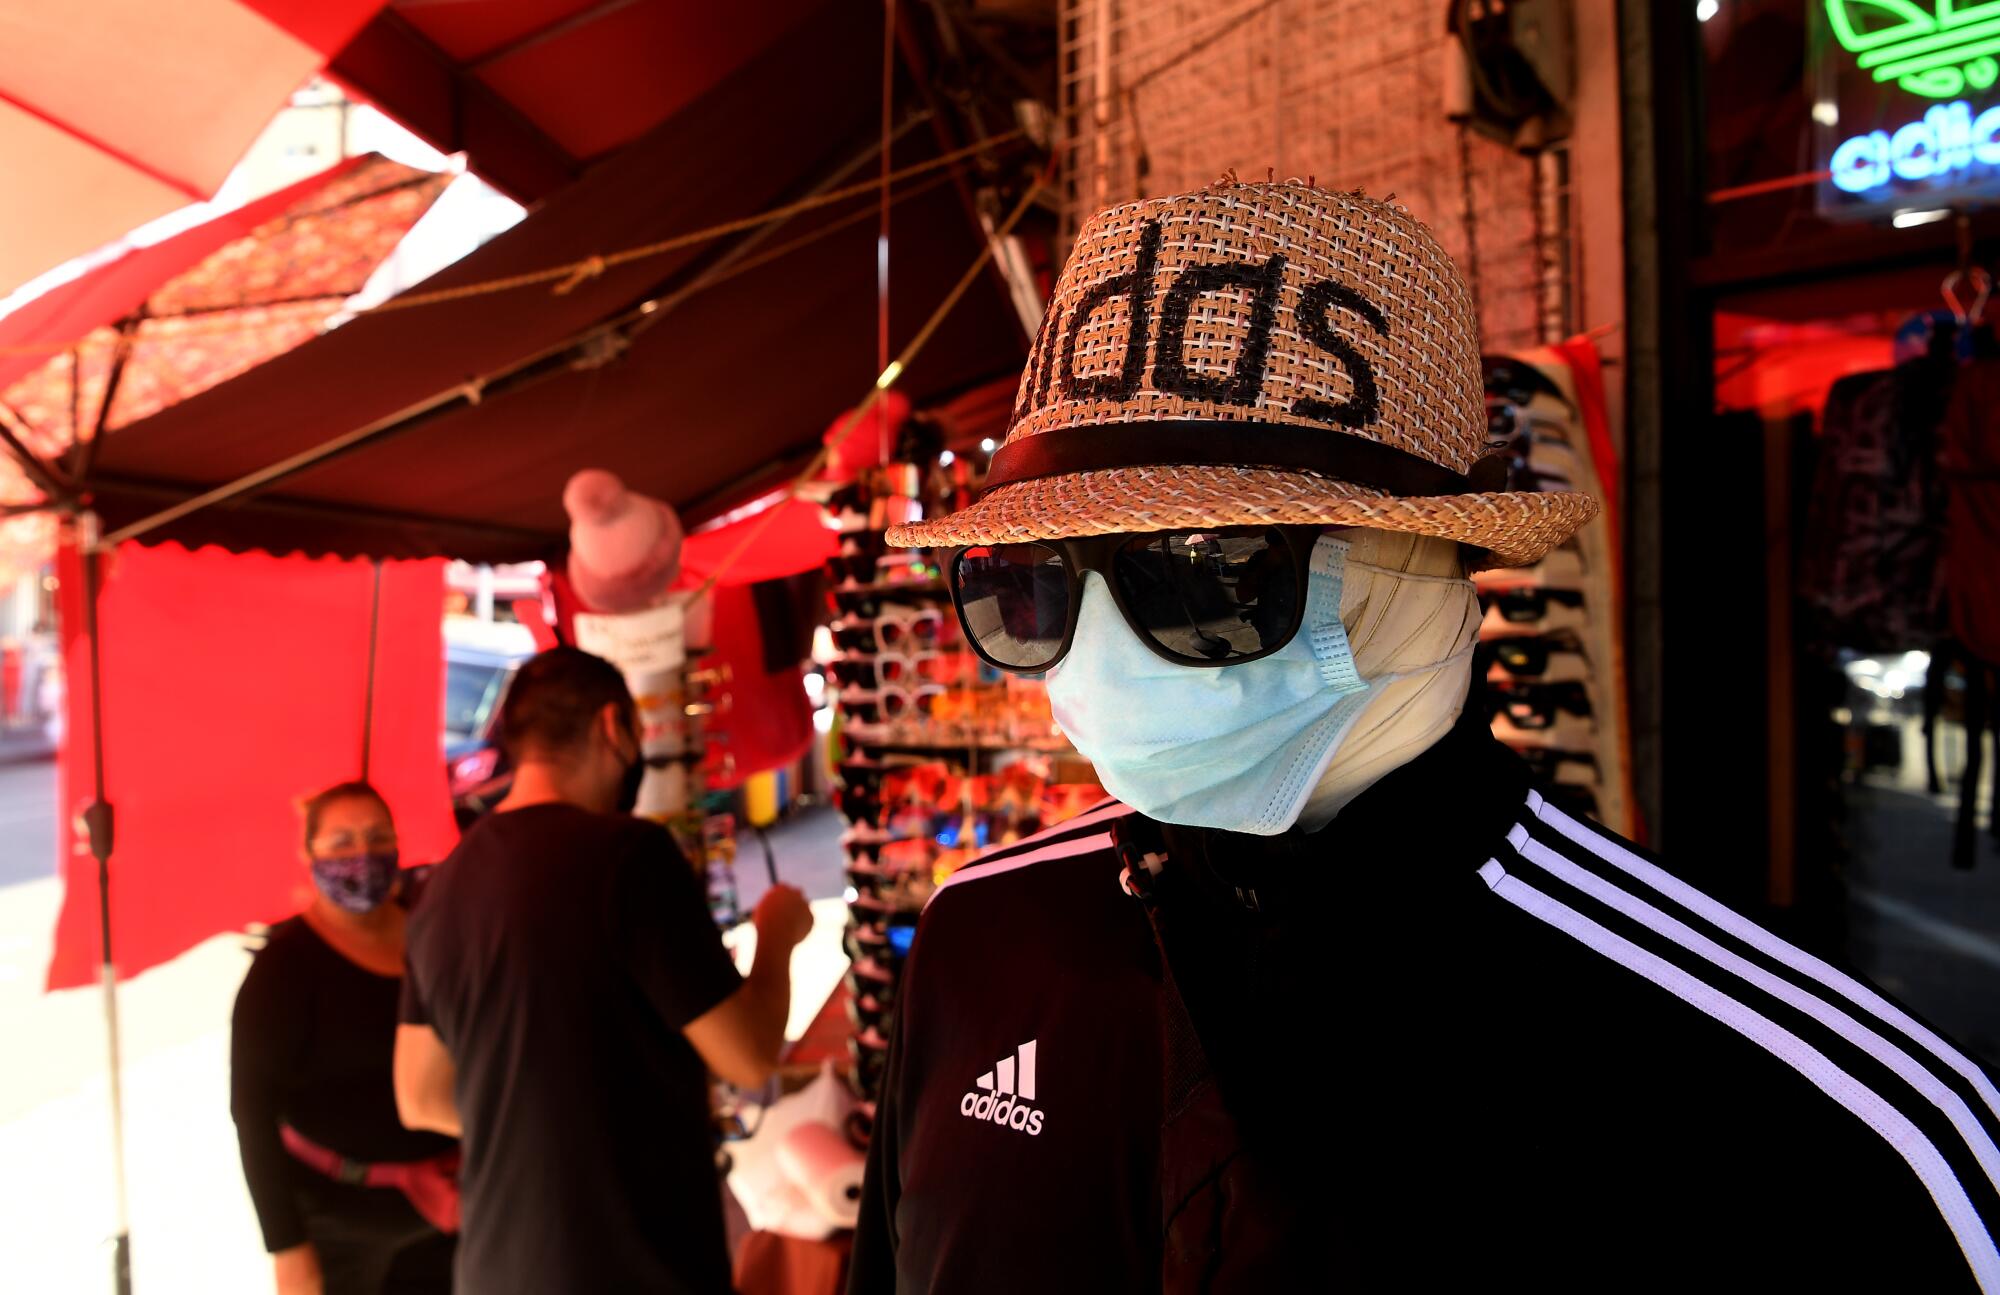 Customers shop along Maple Avenue in Los Angeles near a mannequin in a mask, hat, track jacket and sunglasses.